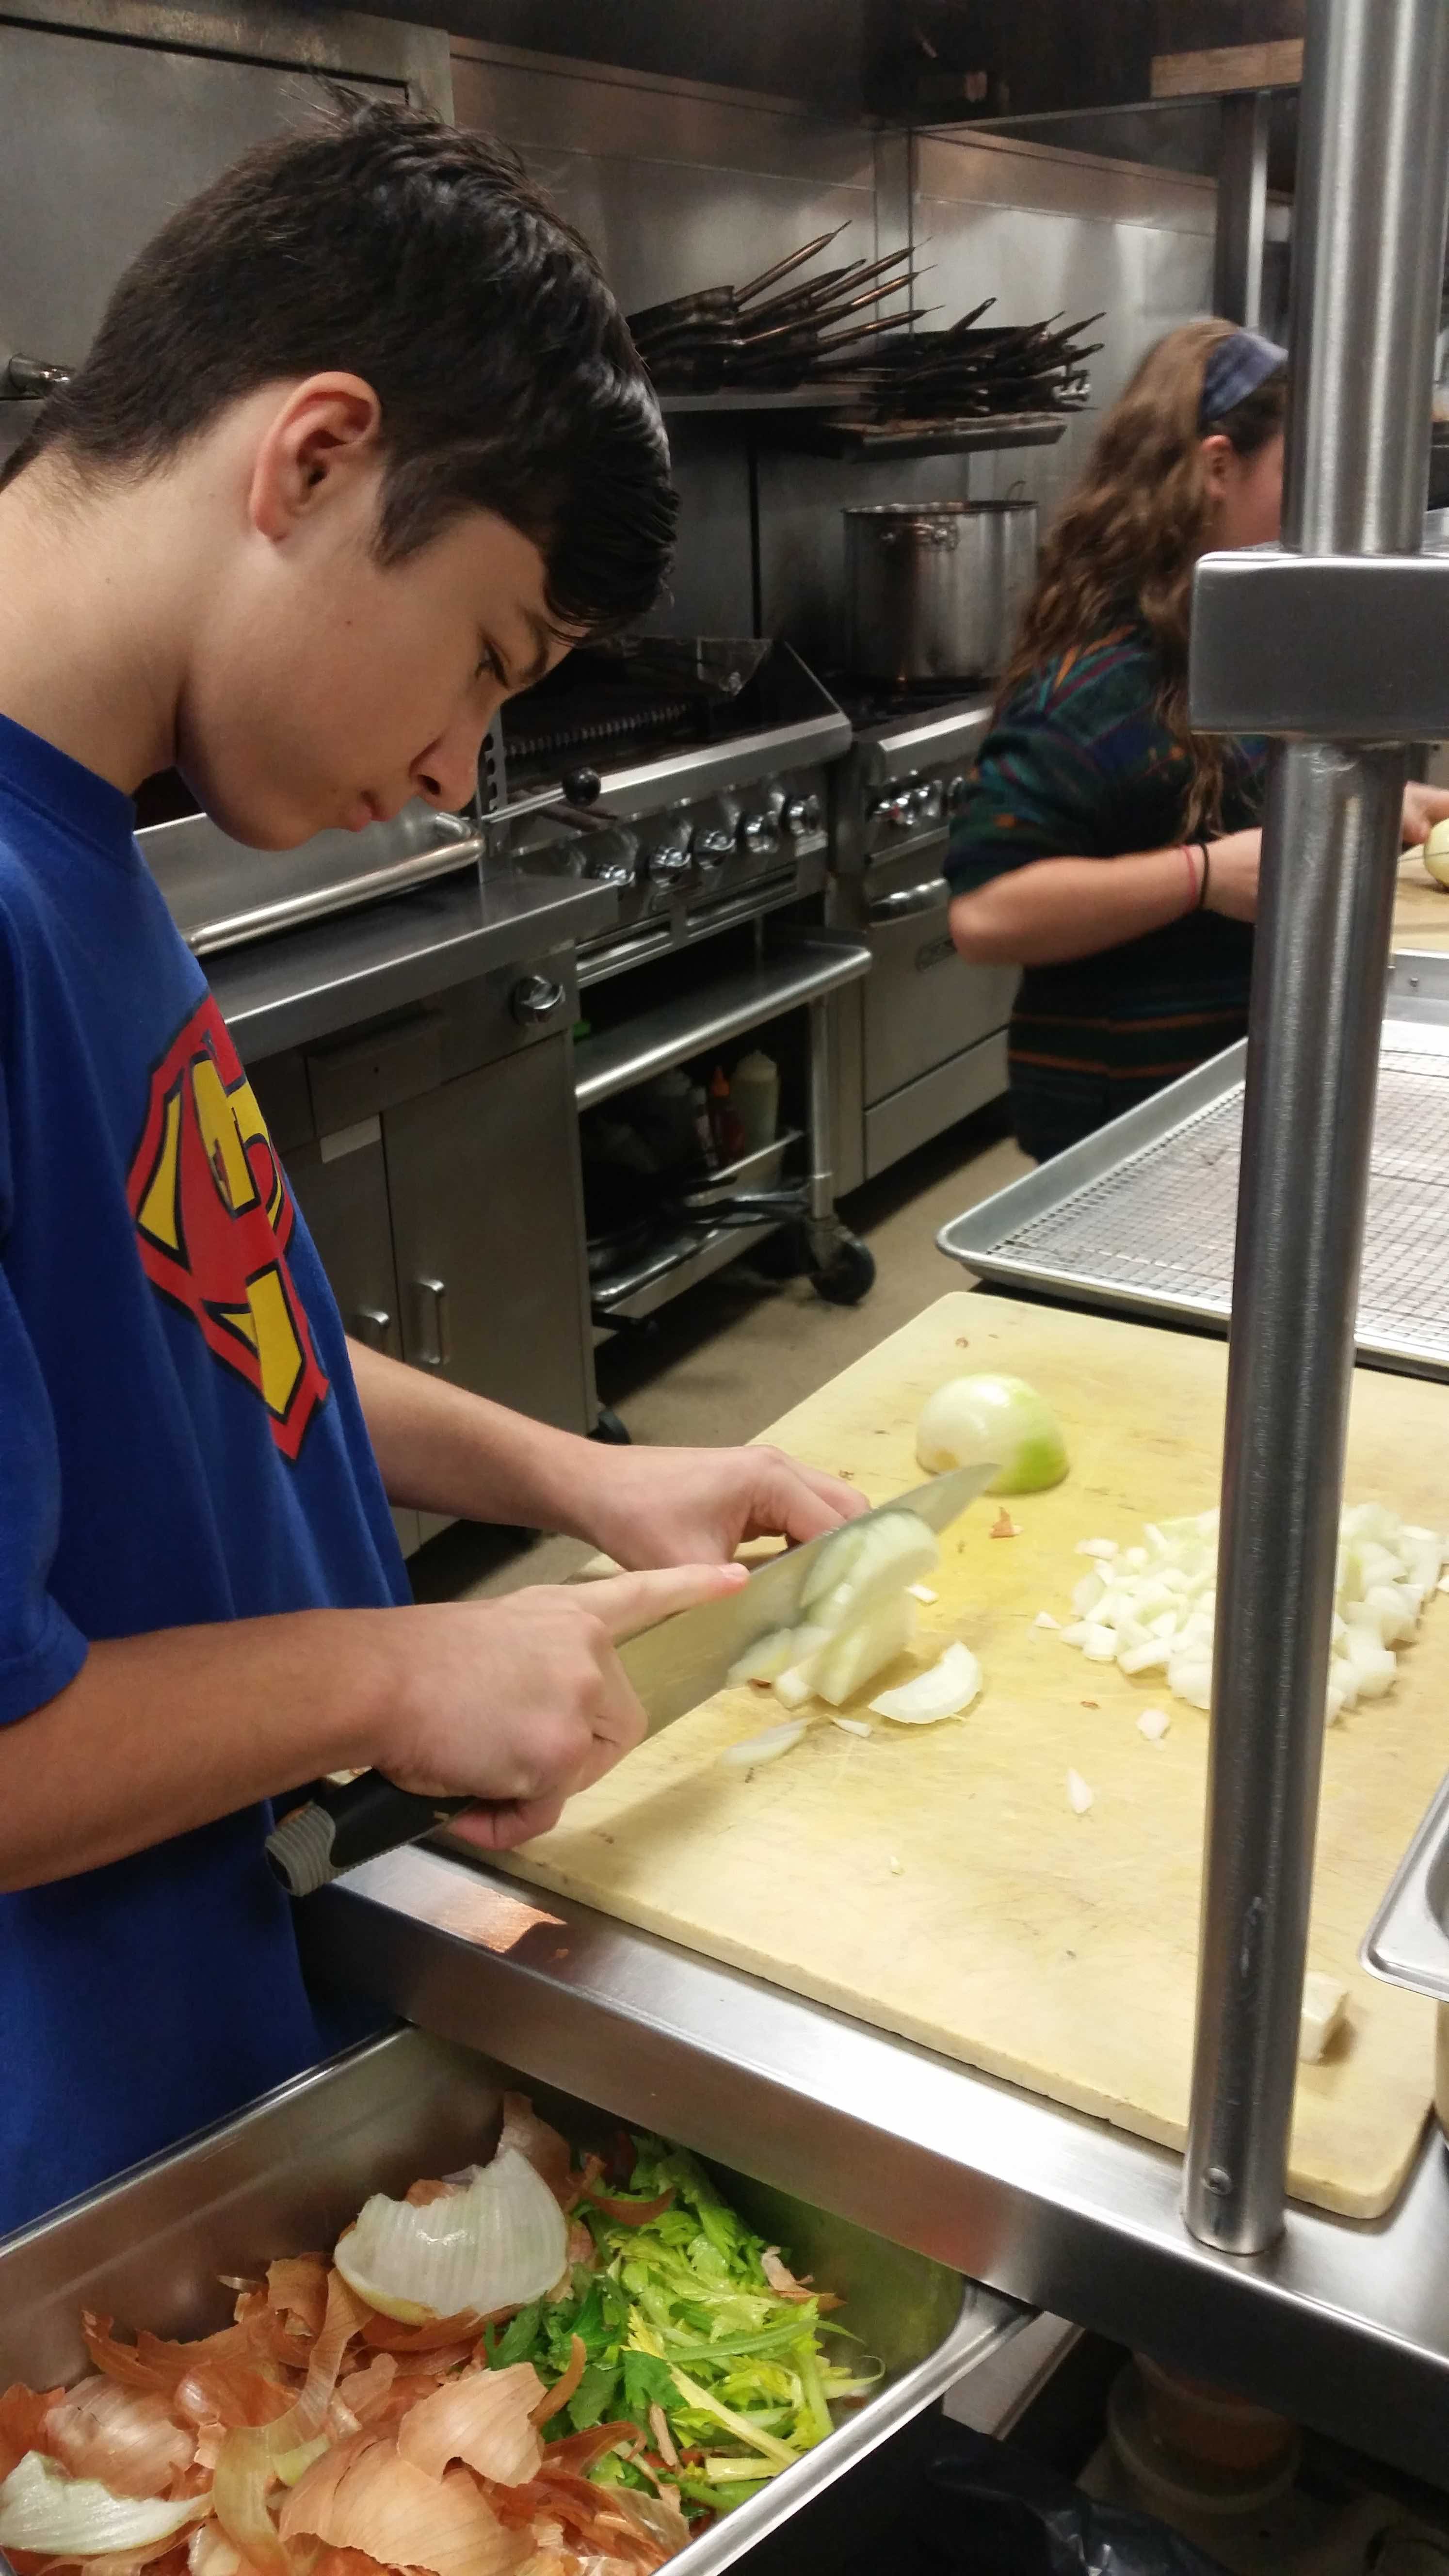 Ridge and Valley Charter School student andrew at soup kitchen